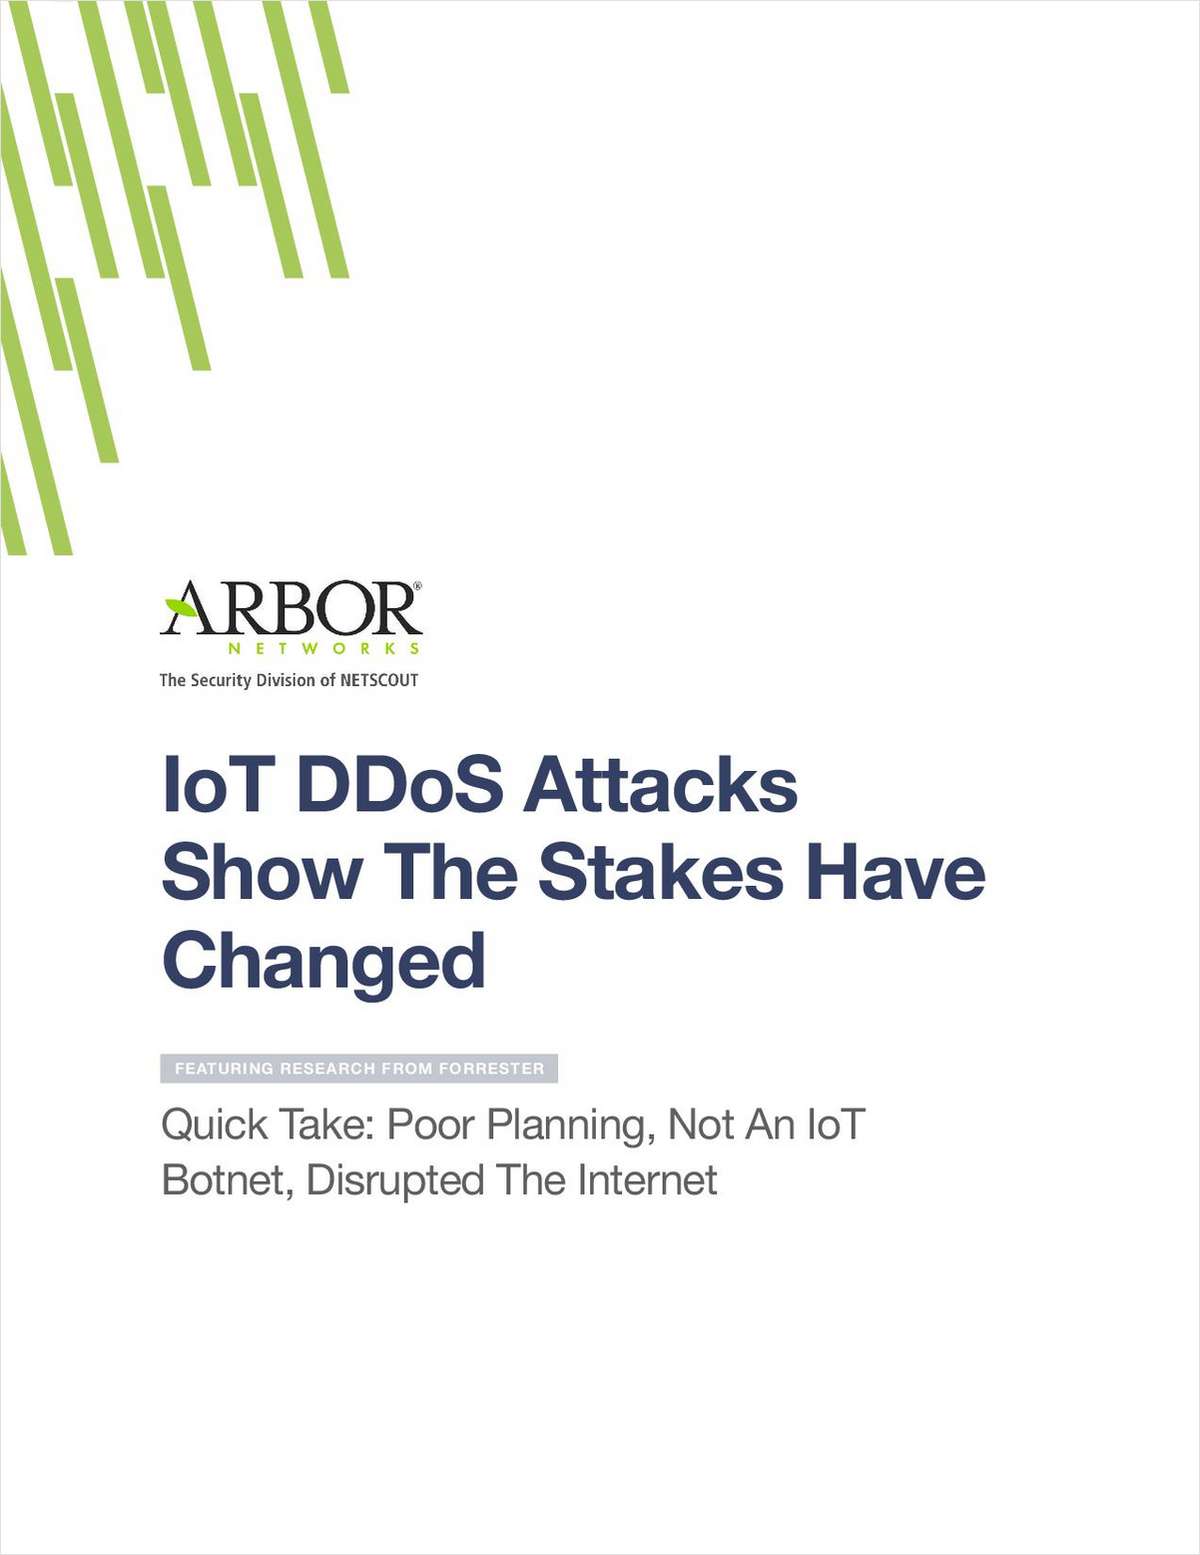 IoT DDoS Attacks Show The Stakes Have Changed